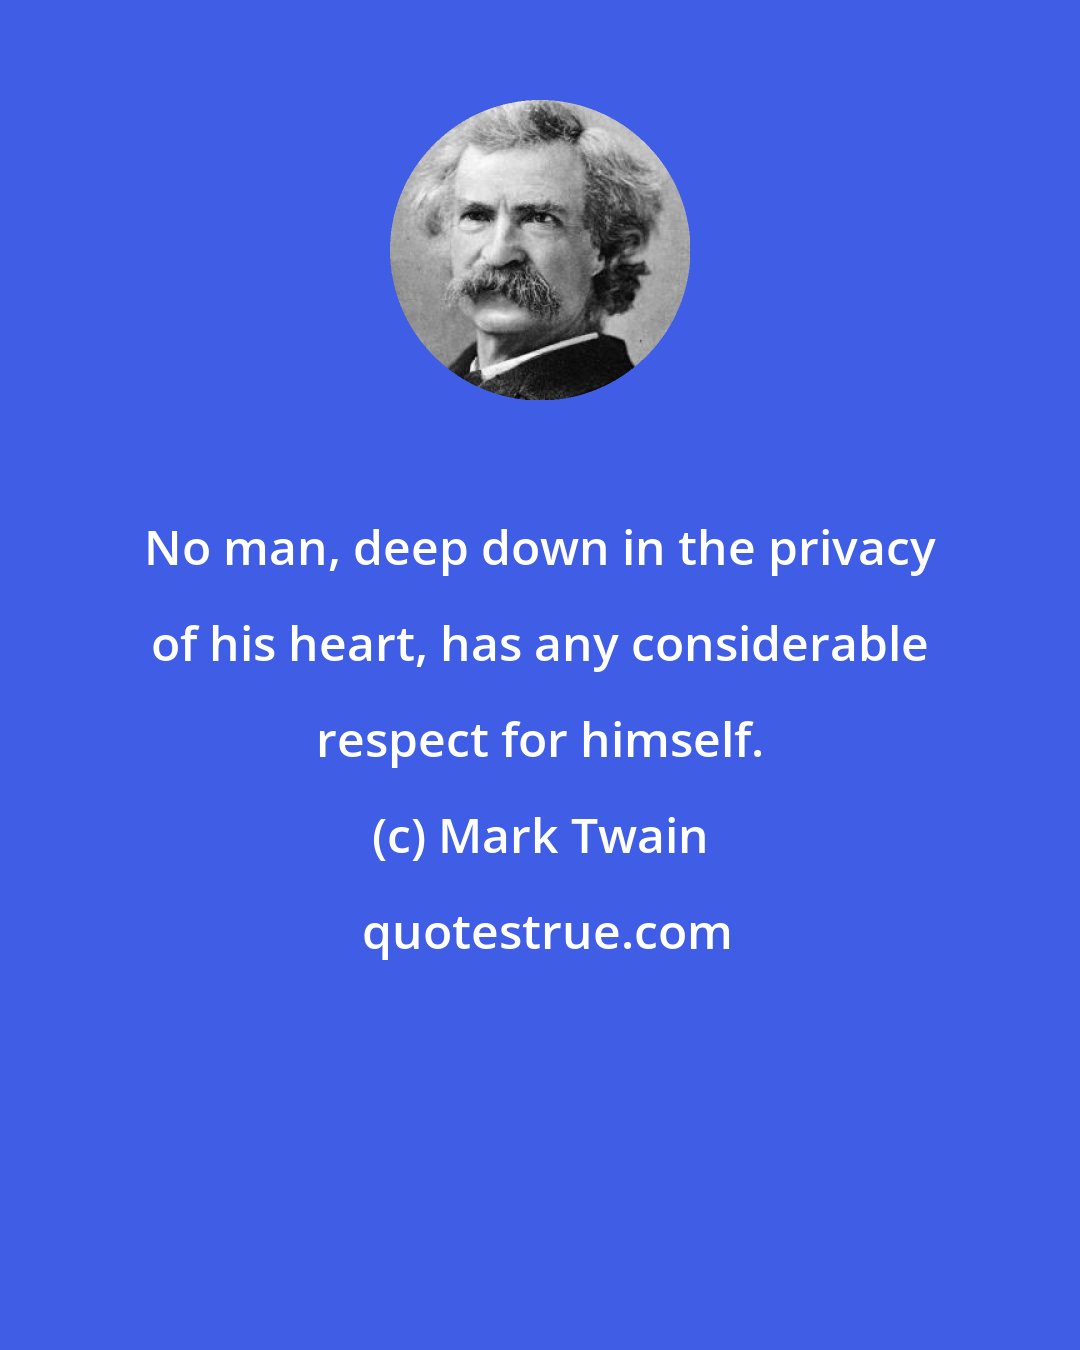 Mark Twain: No man, deep down in the privacy of his heart, has any considerable respect for himself.